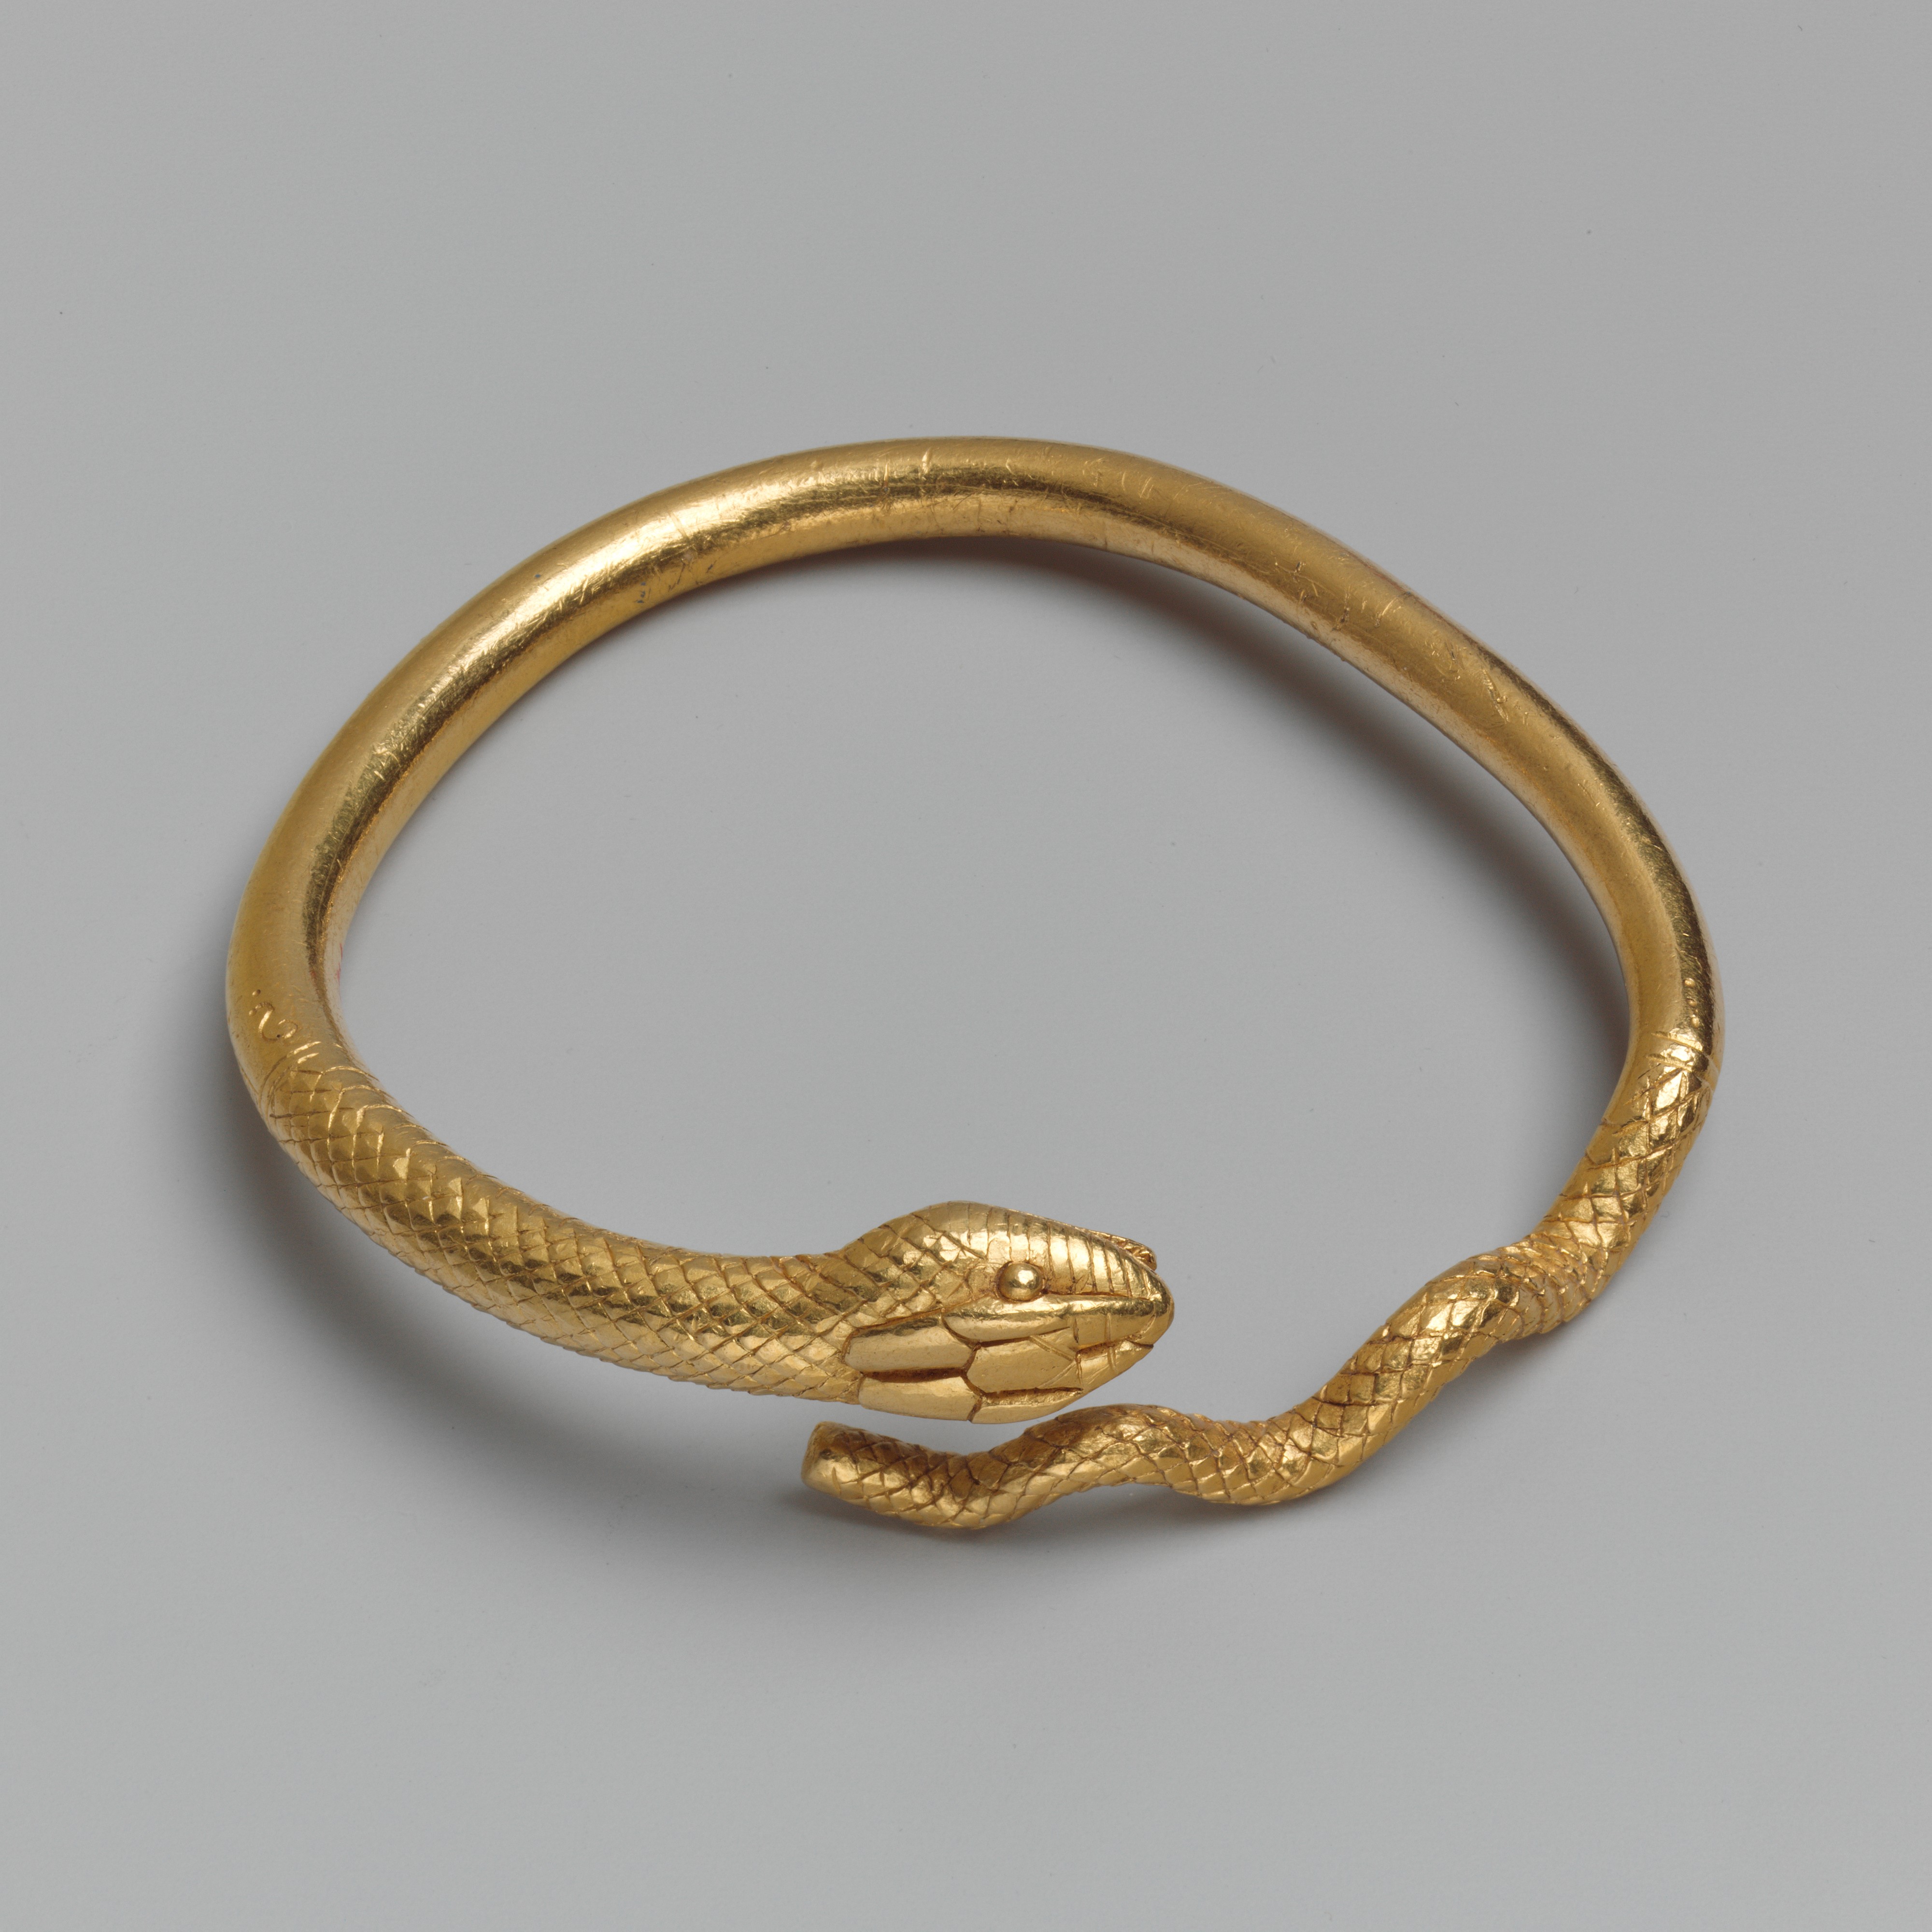 Gold bracelet in the form of a snake  Greek Ptolemaic  Early Hellenistic   The Metropolitan Museum of Art